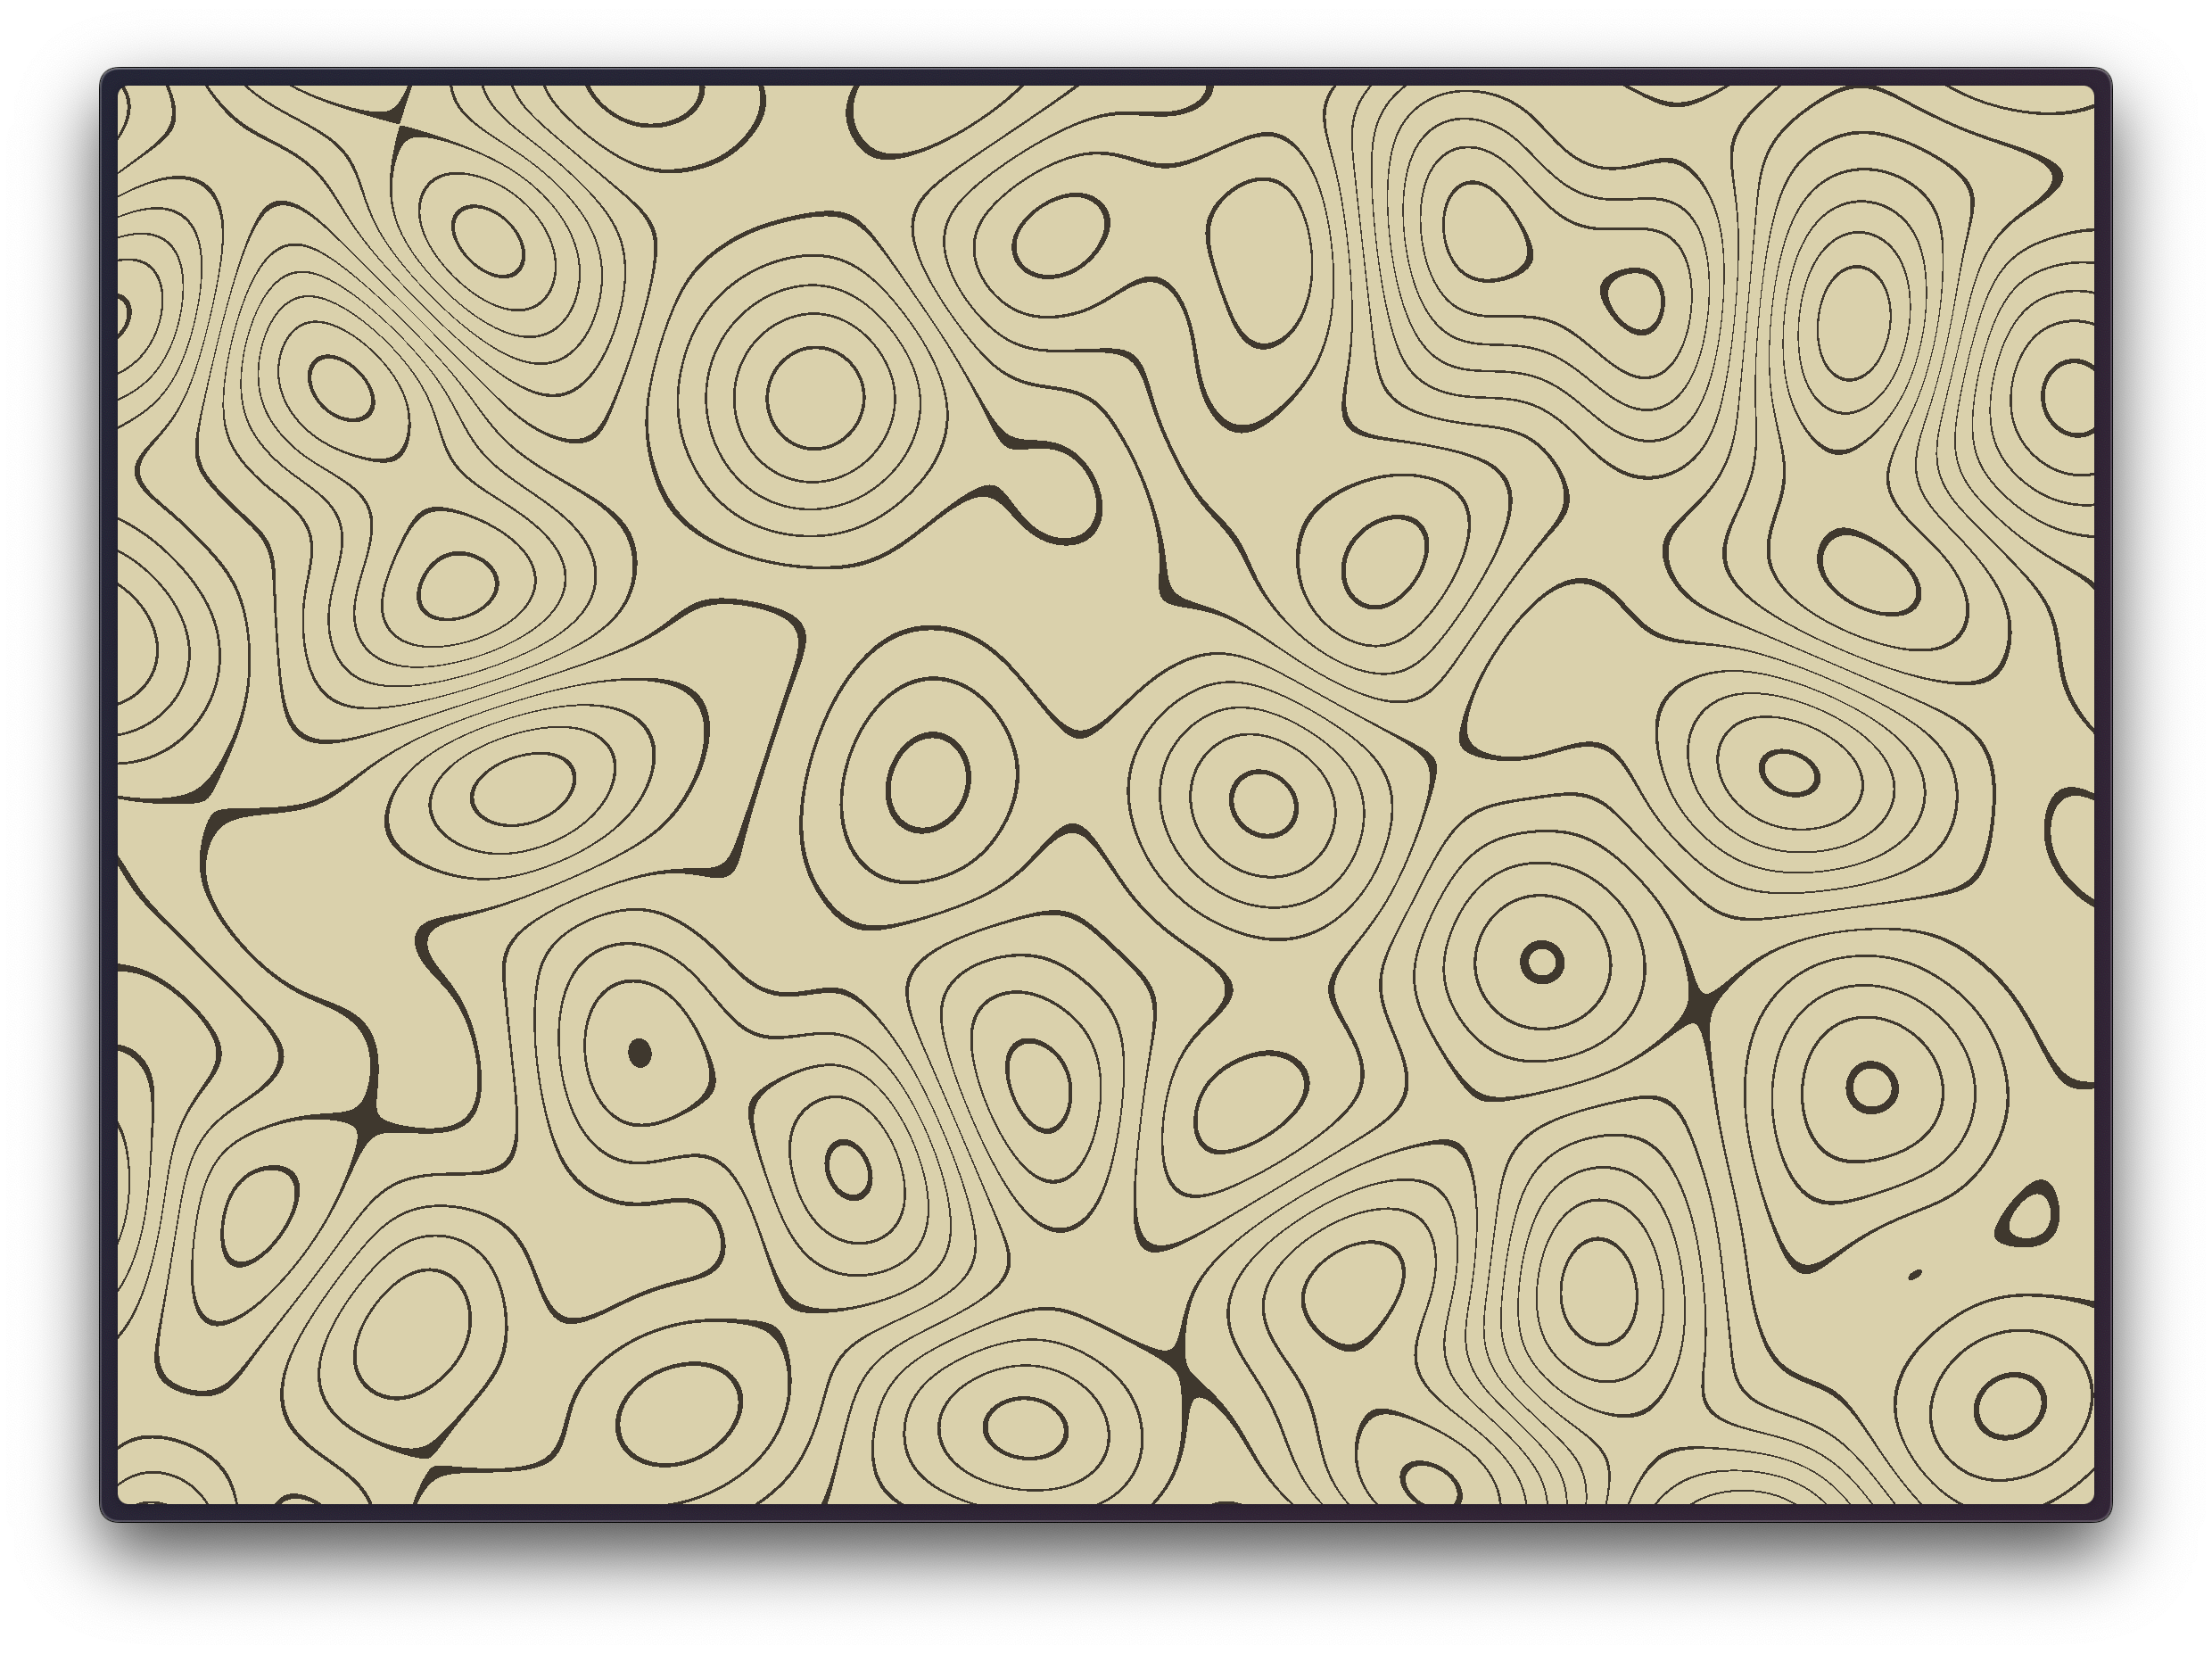 A topographic line art image with a background color of beige, and a foreground color of brown